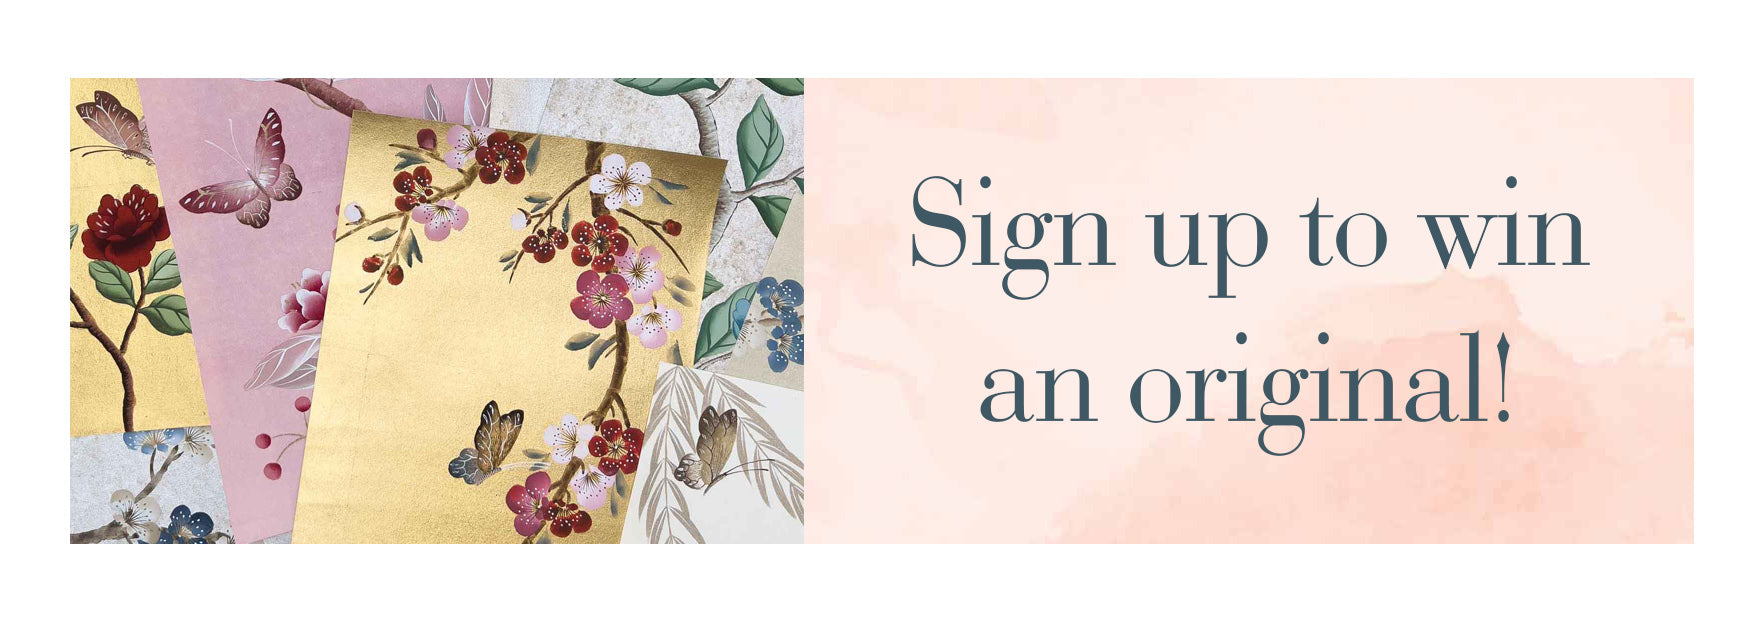 Sign up to win a diane hill original chinoiserie painting worth £500